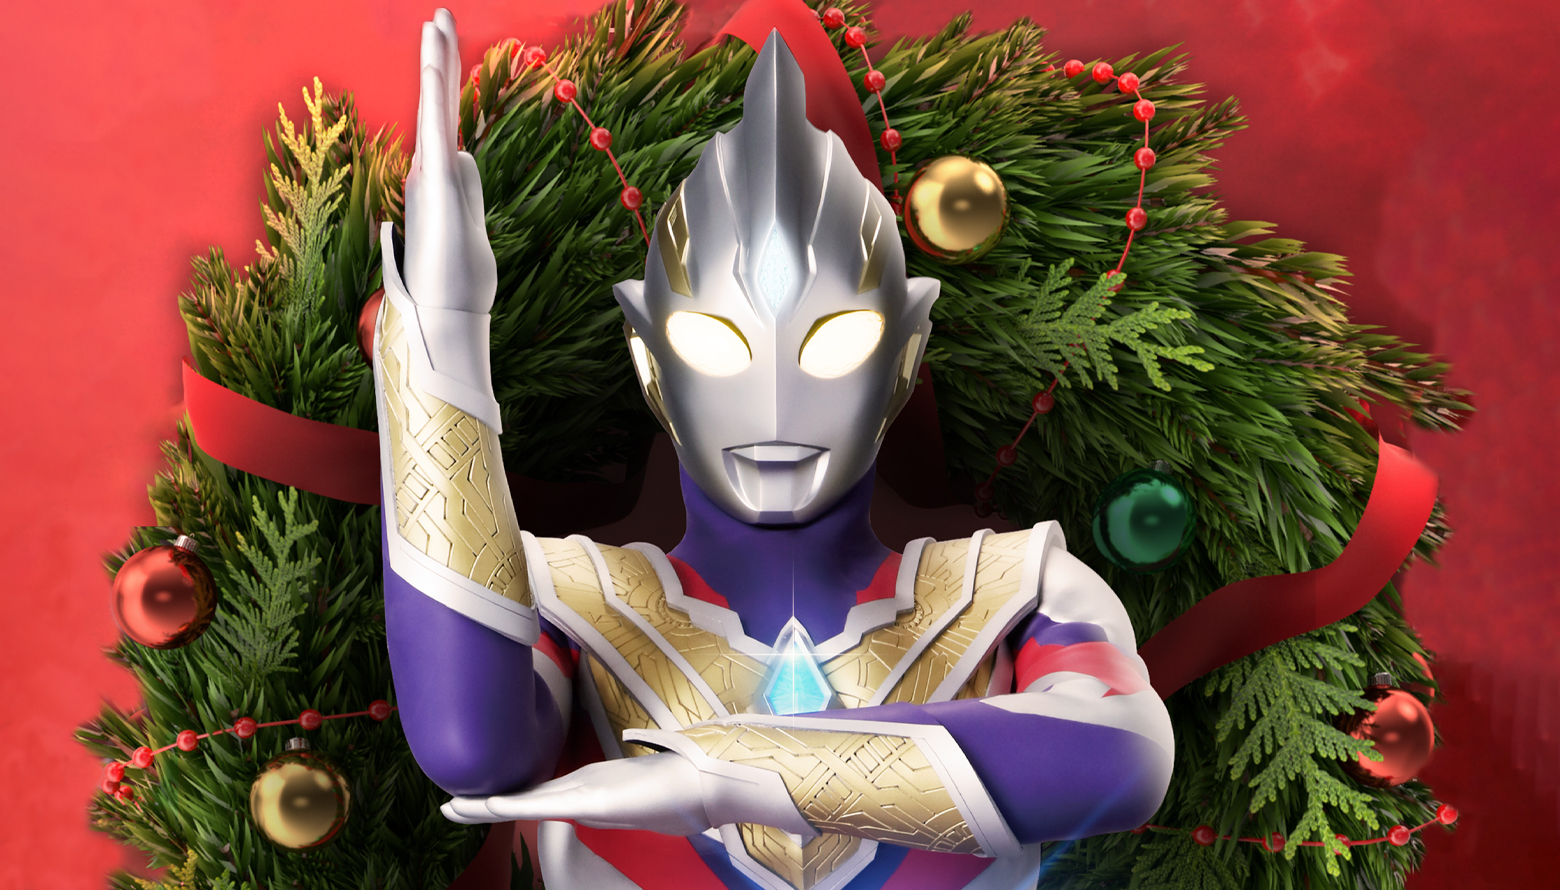 ULTRAMAN CONNECTION LIVE HOLIDAY SPECIAL TIX ON SALE NOW! ADDS ULTRAMAN RIBUT & TRIGGER STARS